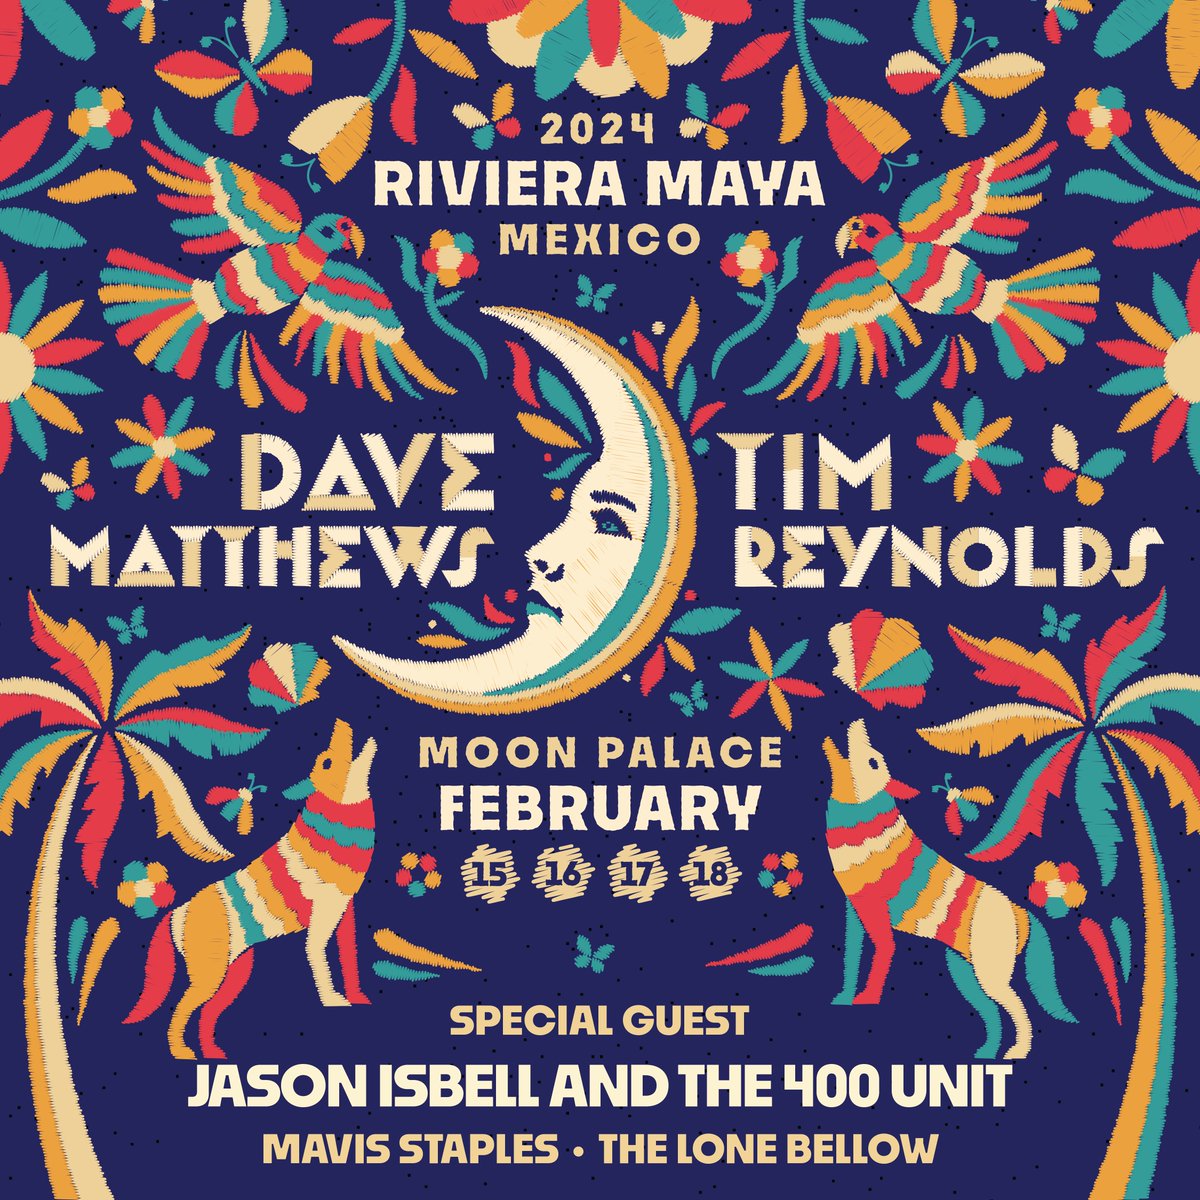 I’m joining Dave Matthews & Tim Reynolds in Mexico for #DaveTimMexico 🏝 All-inclusive packages will be available on July 28th at 1PM ET. For details, visit daveandtimrivieramaya.com